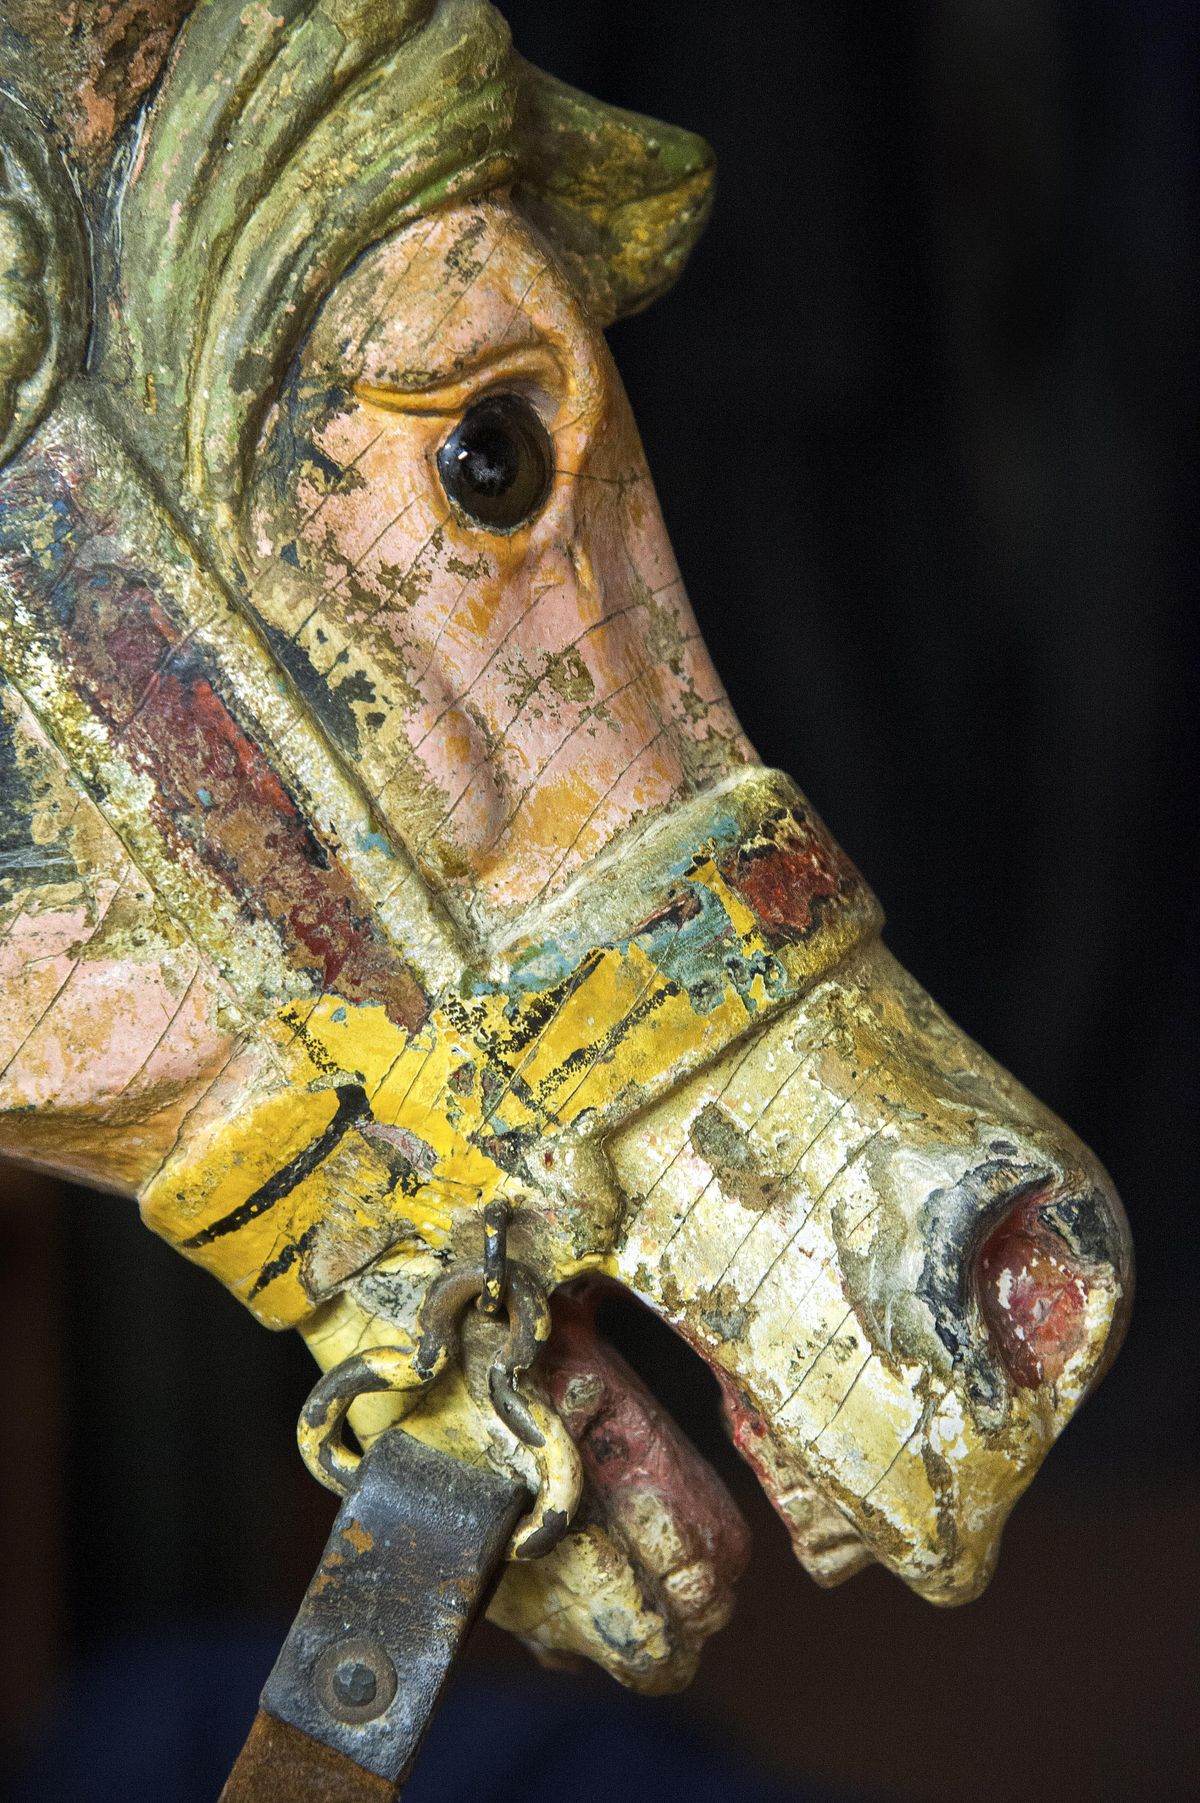 Years of wear and tear are evident on “Jack,” carved of poplar wood by Charles Looff in 1886 for a carousel on Coney Island. The horse has been donated to Spokane by a private estate. (Dan Pelle / The Spokesman-Review)